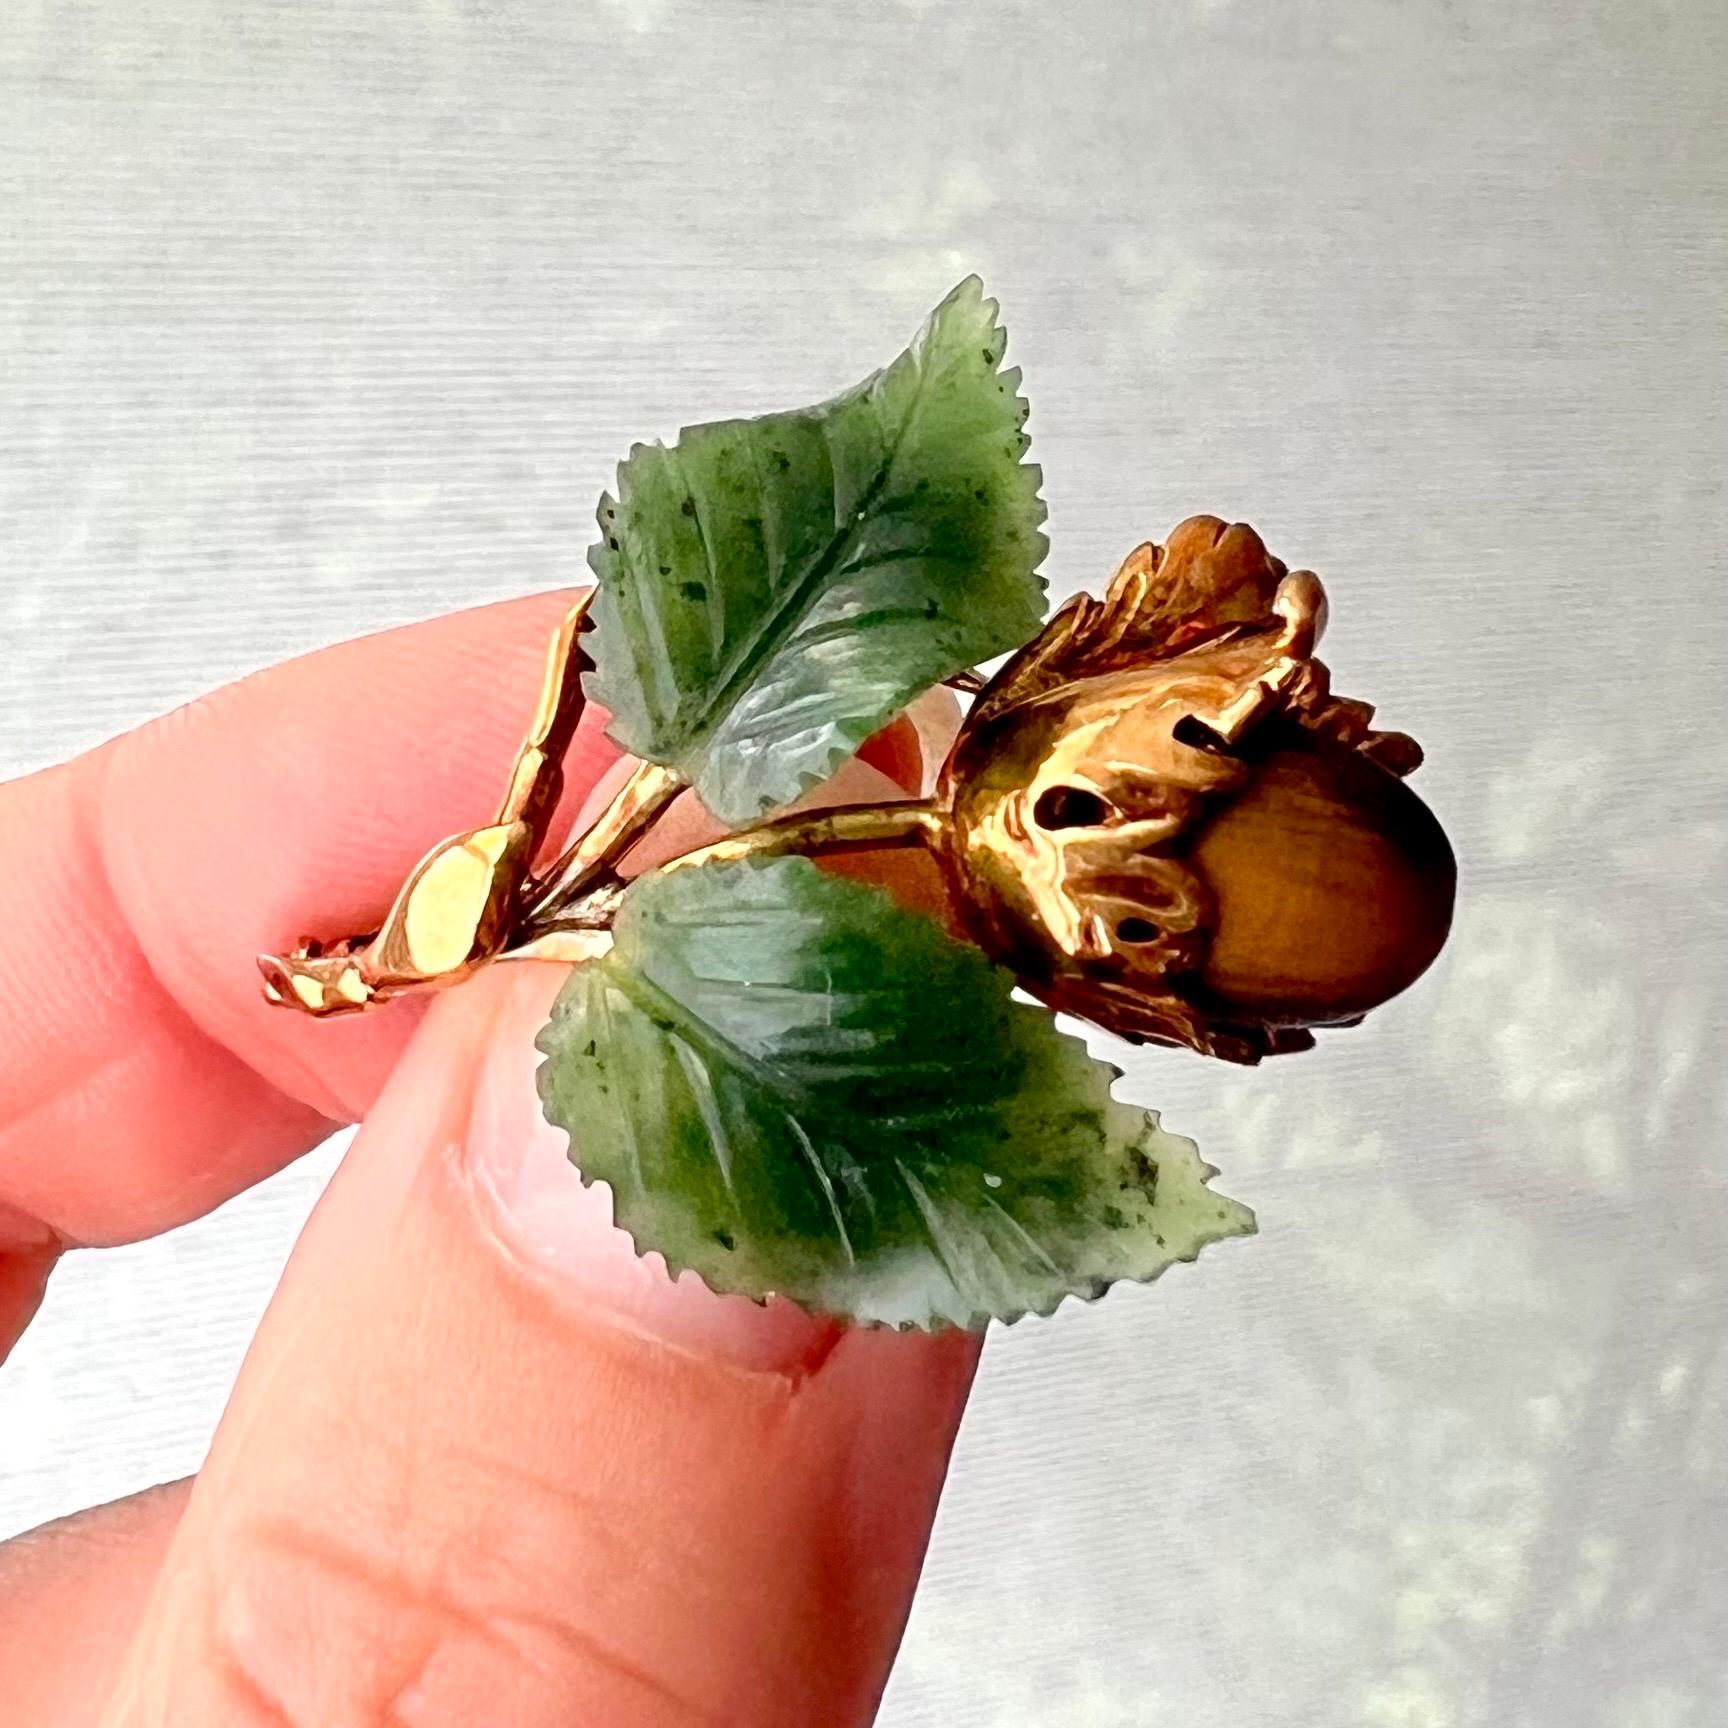 This is a  14 karat yellow gold branch brooch created with beautifully realistic leaves carved from nephrite and tiger's eye acorn inlaid in a mantle of gold. This naturalistic brooch is made in the shape of a freshly fallen branch with a brown